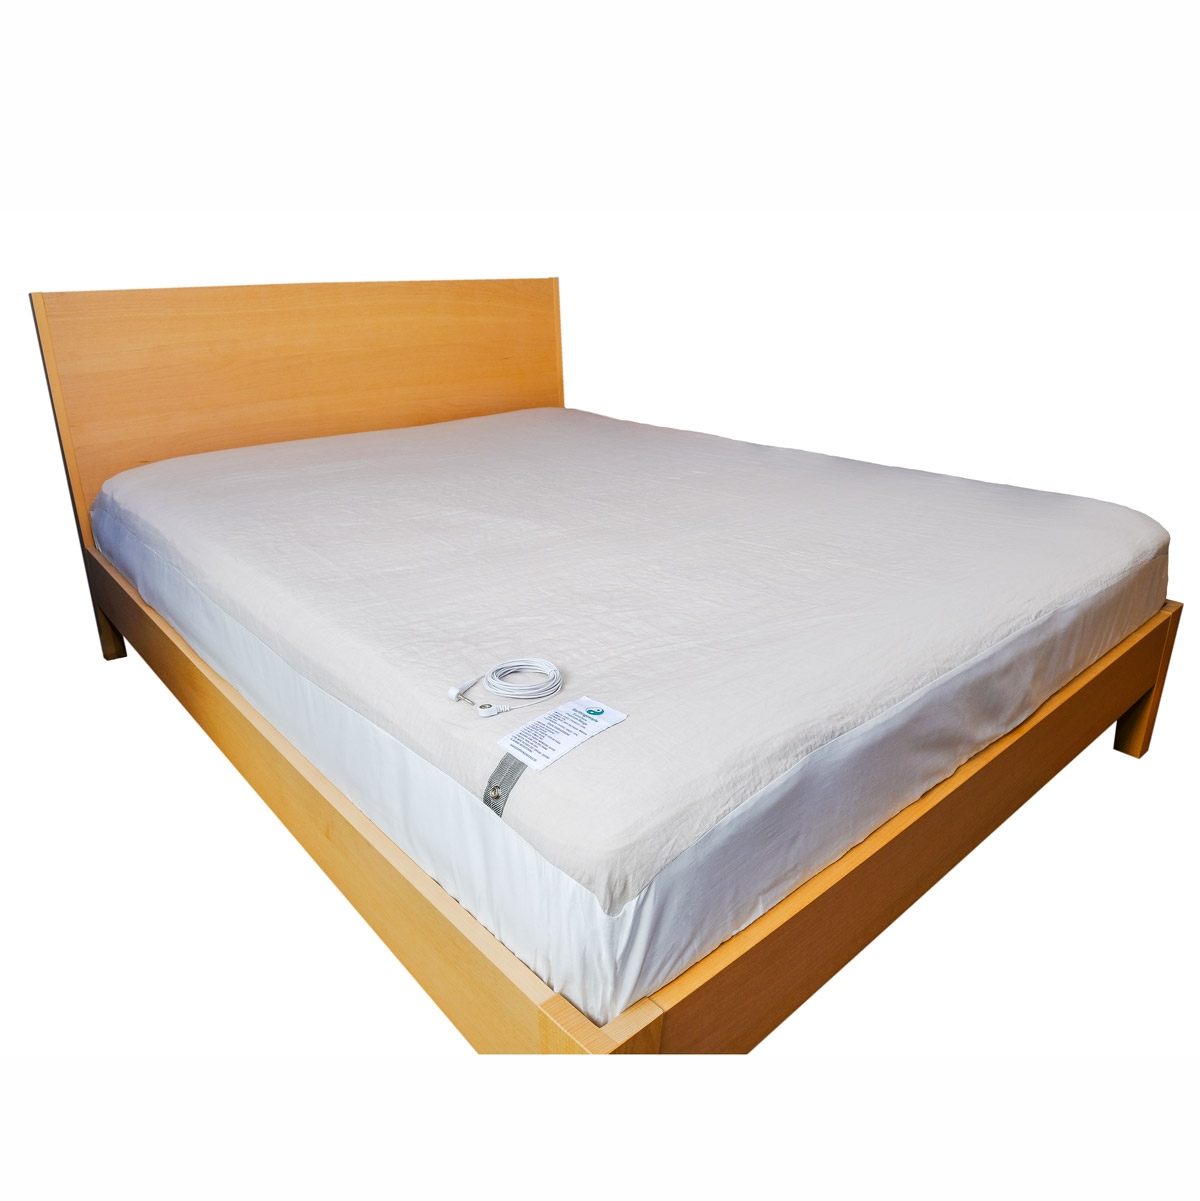 SALE! Premium fitted sheet, 120x200 cm (UK small double) + sheet stretchers